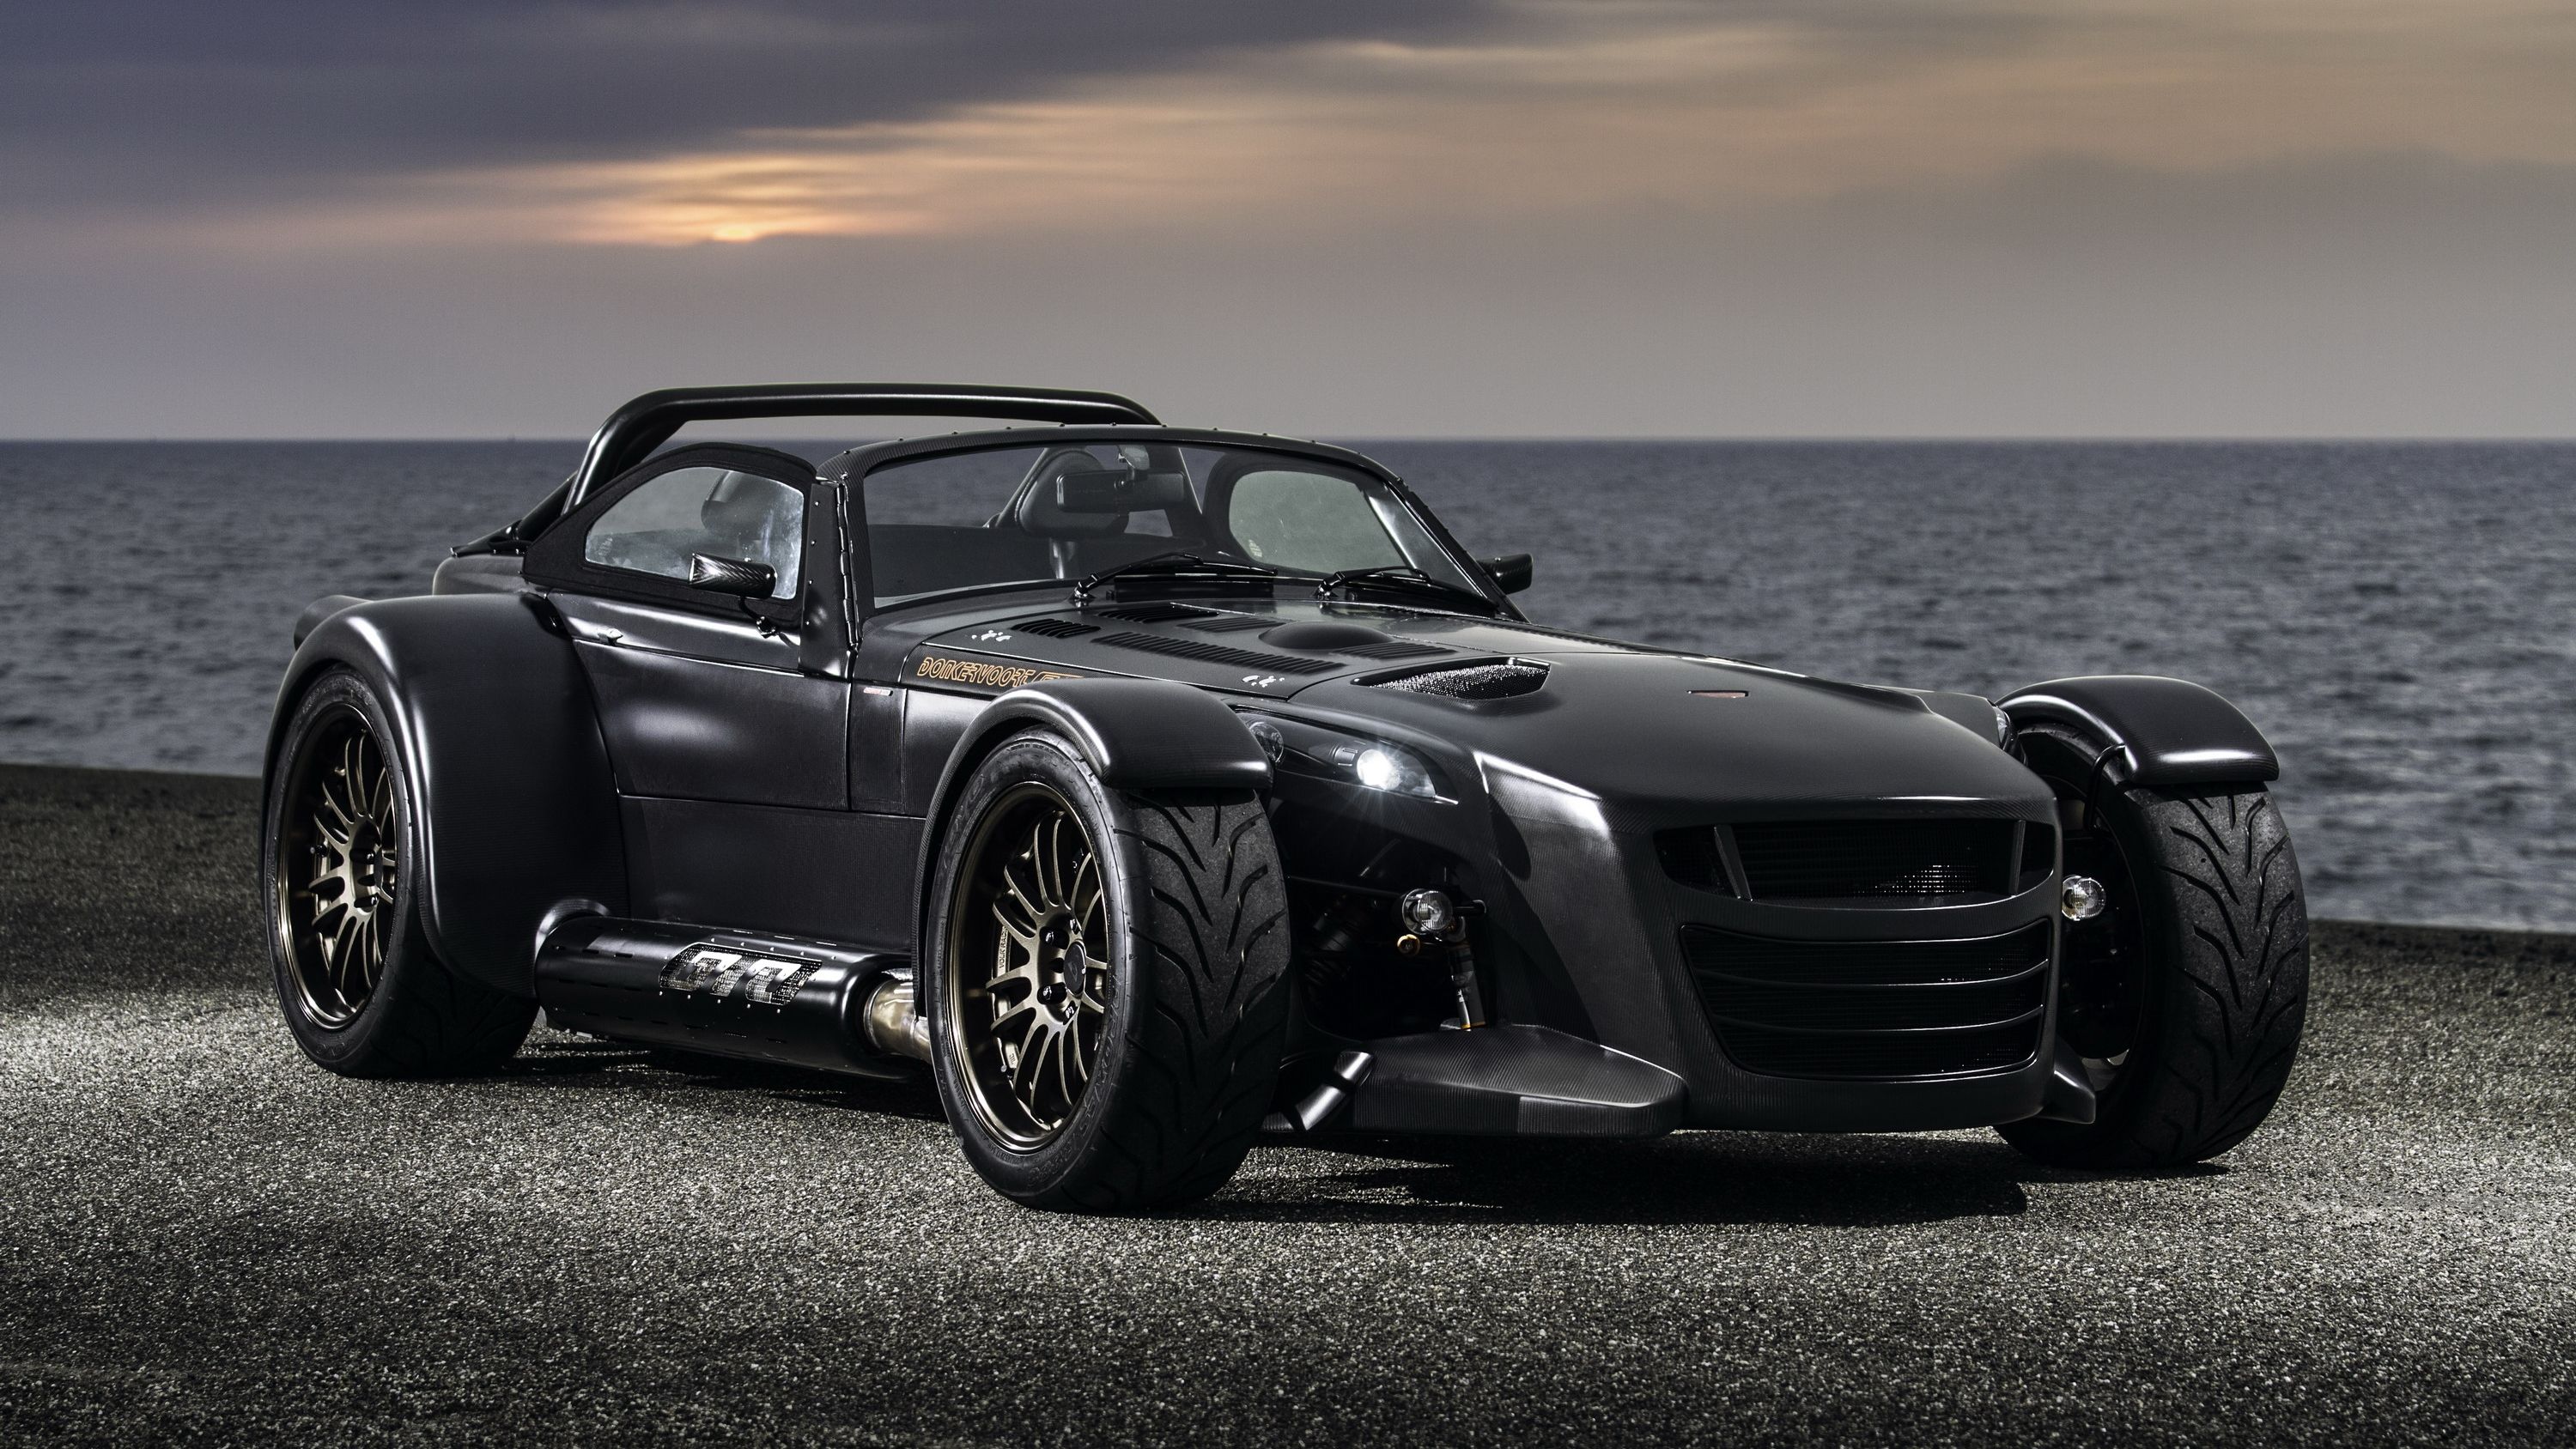 Donkervoort D8 GTO Bare Naked Carbon Edition Picture, Photo